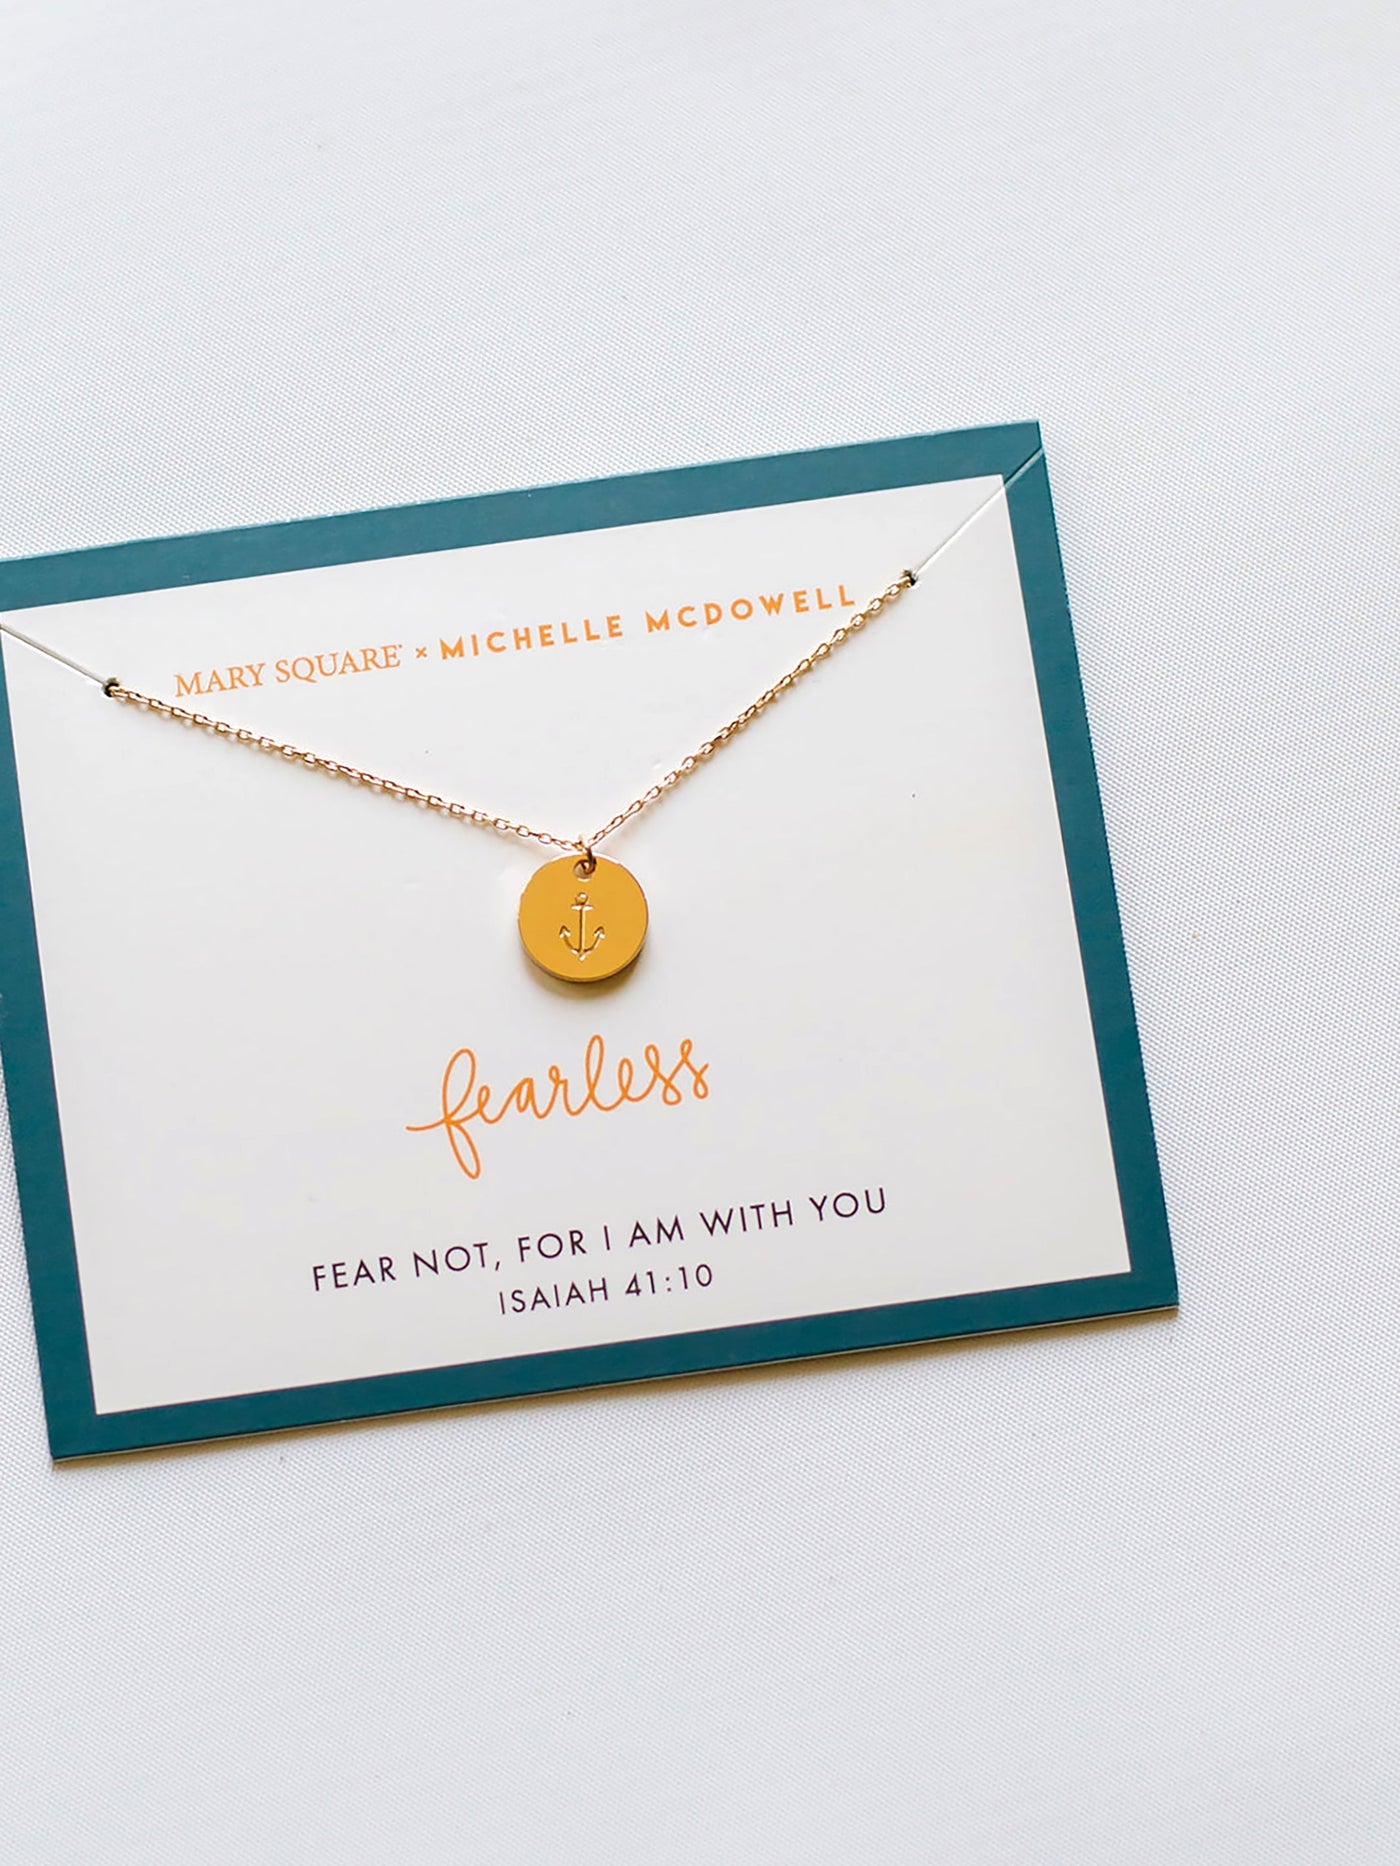 Fearless Inspirational Necklace - Mary Square, LLC